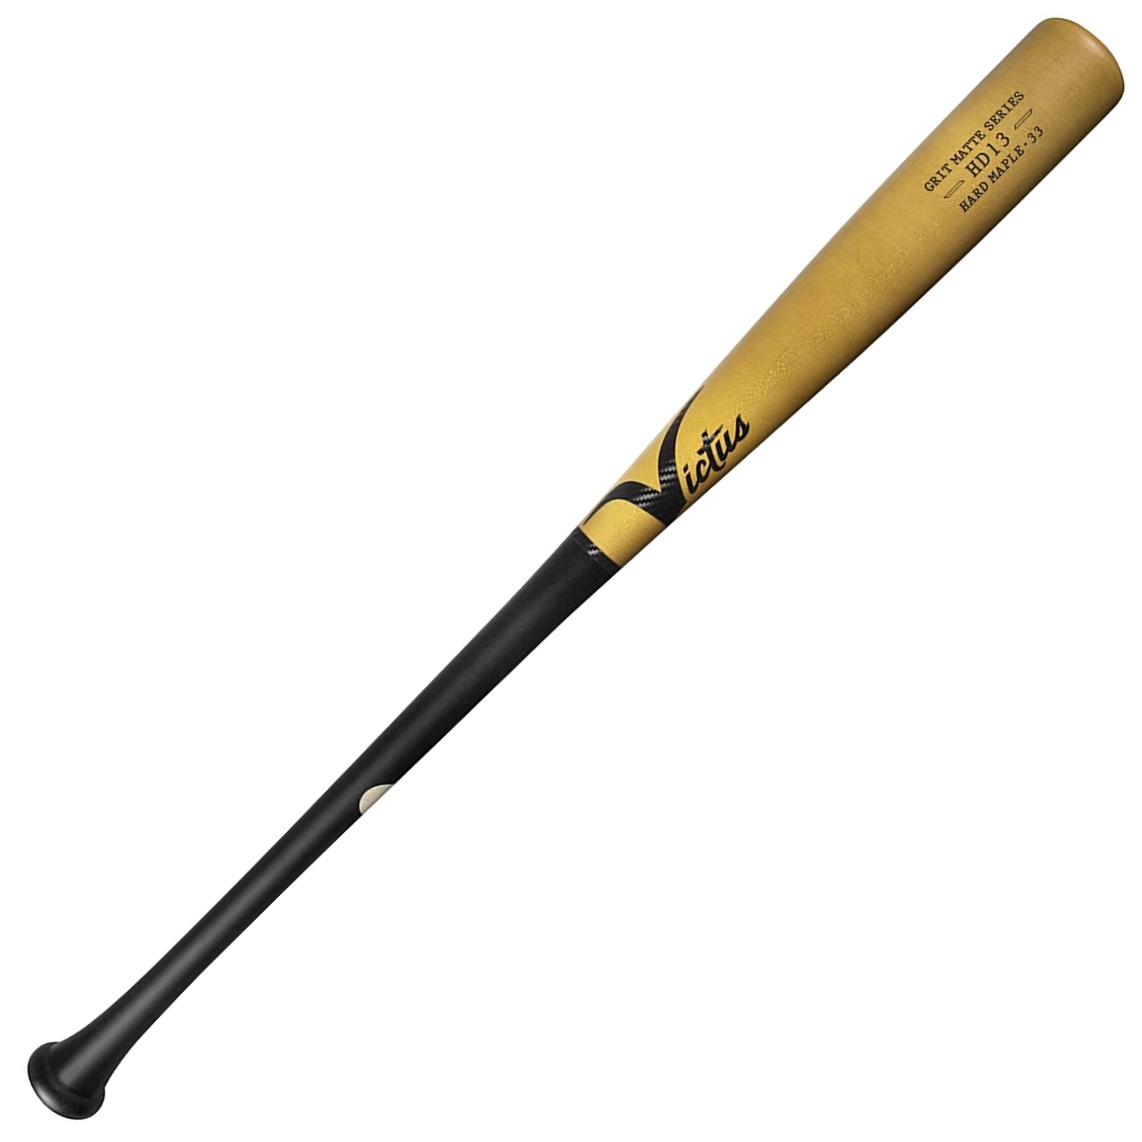 The HD13 Pro Reserve is essentially an I13 with incredible pop and terrific durability. The HD13 knob flares into the thin handle which then tapers up gradually to the barrel. The hitting surface is fairly large which loads the end a little more. Victus Grit Matte bats are made for grinders. Featuring the same quality wood as our Pro Reserve line, the textured matte finish gives these bats a unique look and feel and has been rumored to grip the ball and create more backspin. - Approximately -3 length to weight ratio - Slightly End Loaded Swing Weight - Textured matte finish maple - Big League-grade ink dot certified - Knob: Slight flare - Handle: Thin - Barrel: Medium - NO warranty